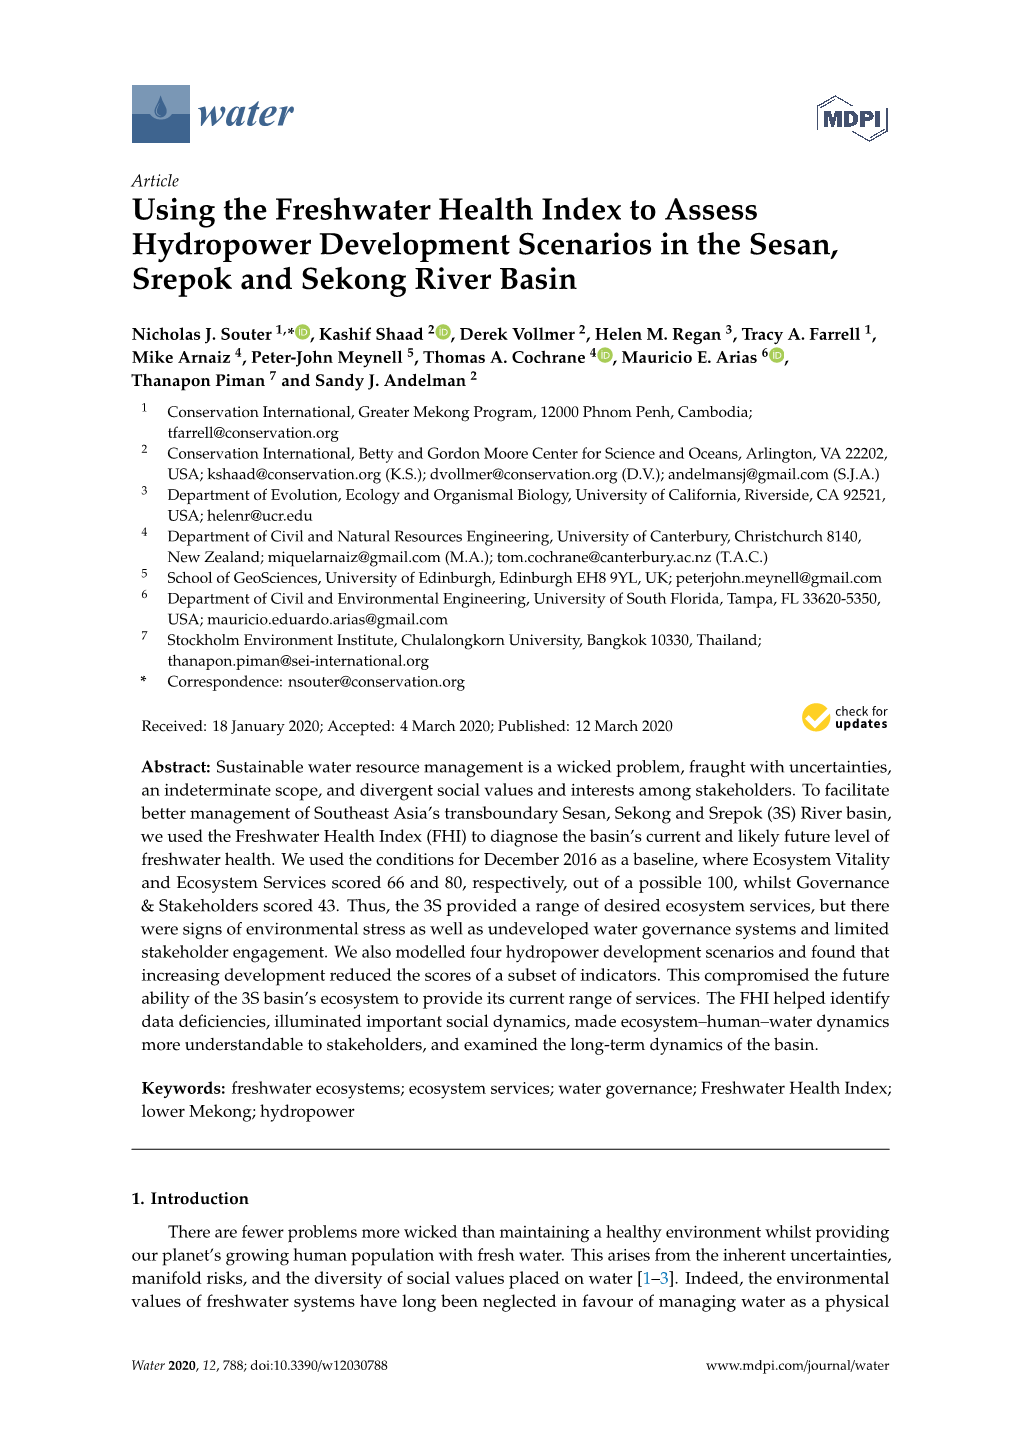 Using the Freshwater Health Index to Assess Hydropower Development Scenarios in the Sesan, Srepok and Sekong River Basin